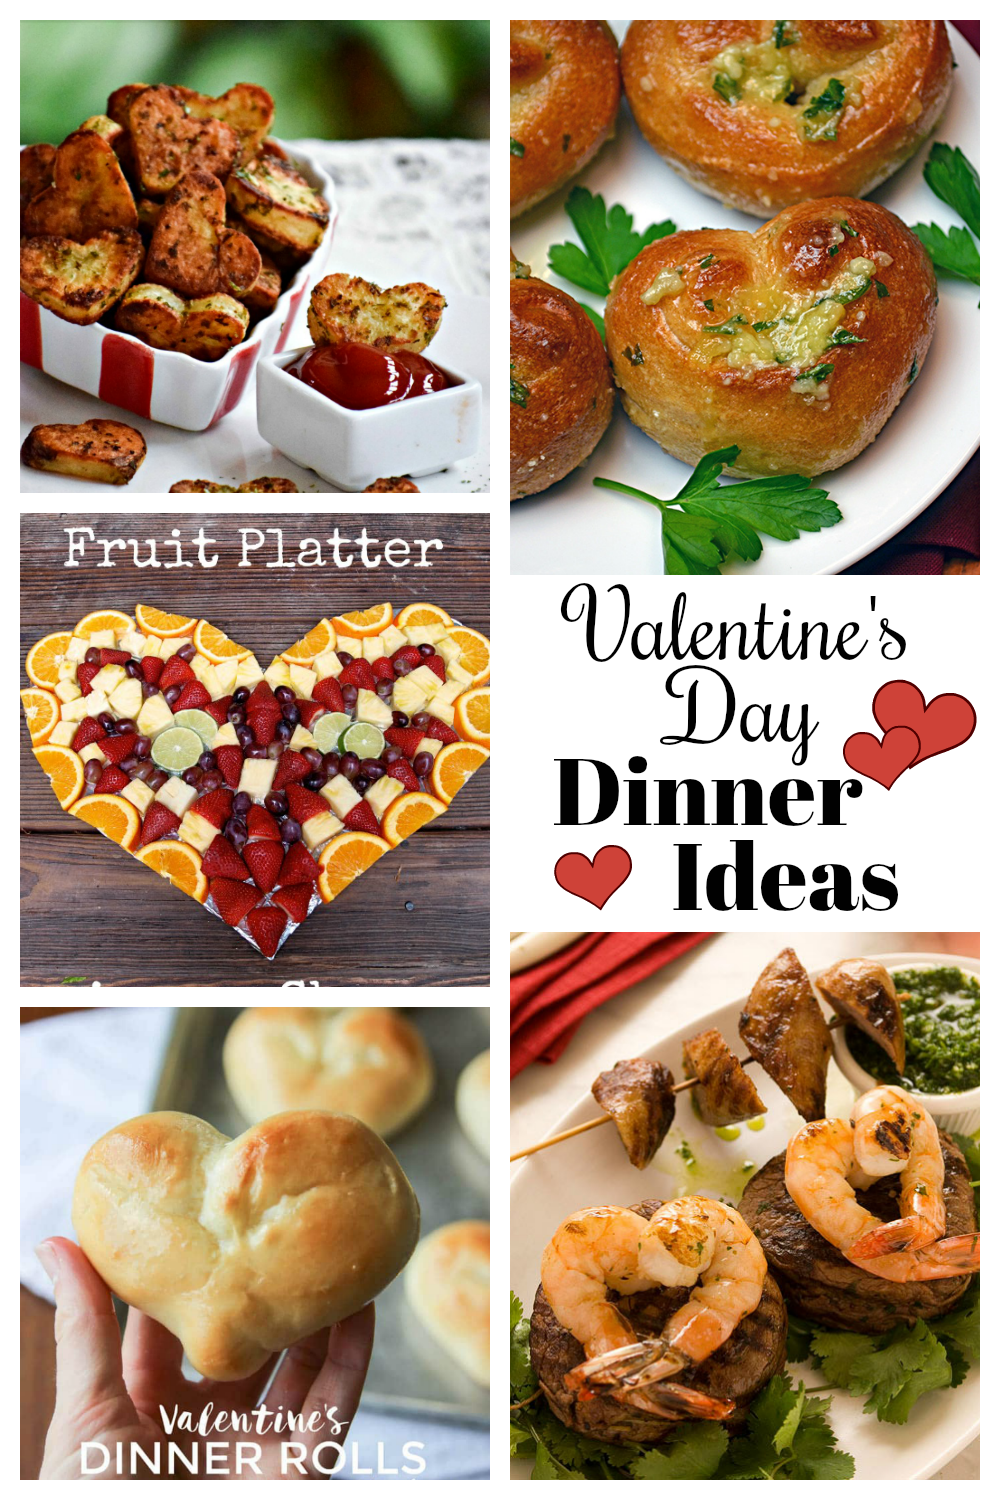 Valentine's Day Dinner Ideas. These fun Valentine's dinner ideas are the perfect way to make your Valentine's Day special. #Valentinesdaydinner #funvalentinesdayideas #heartshapedfood 